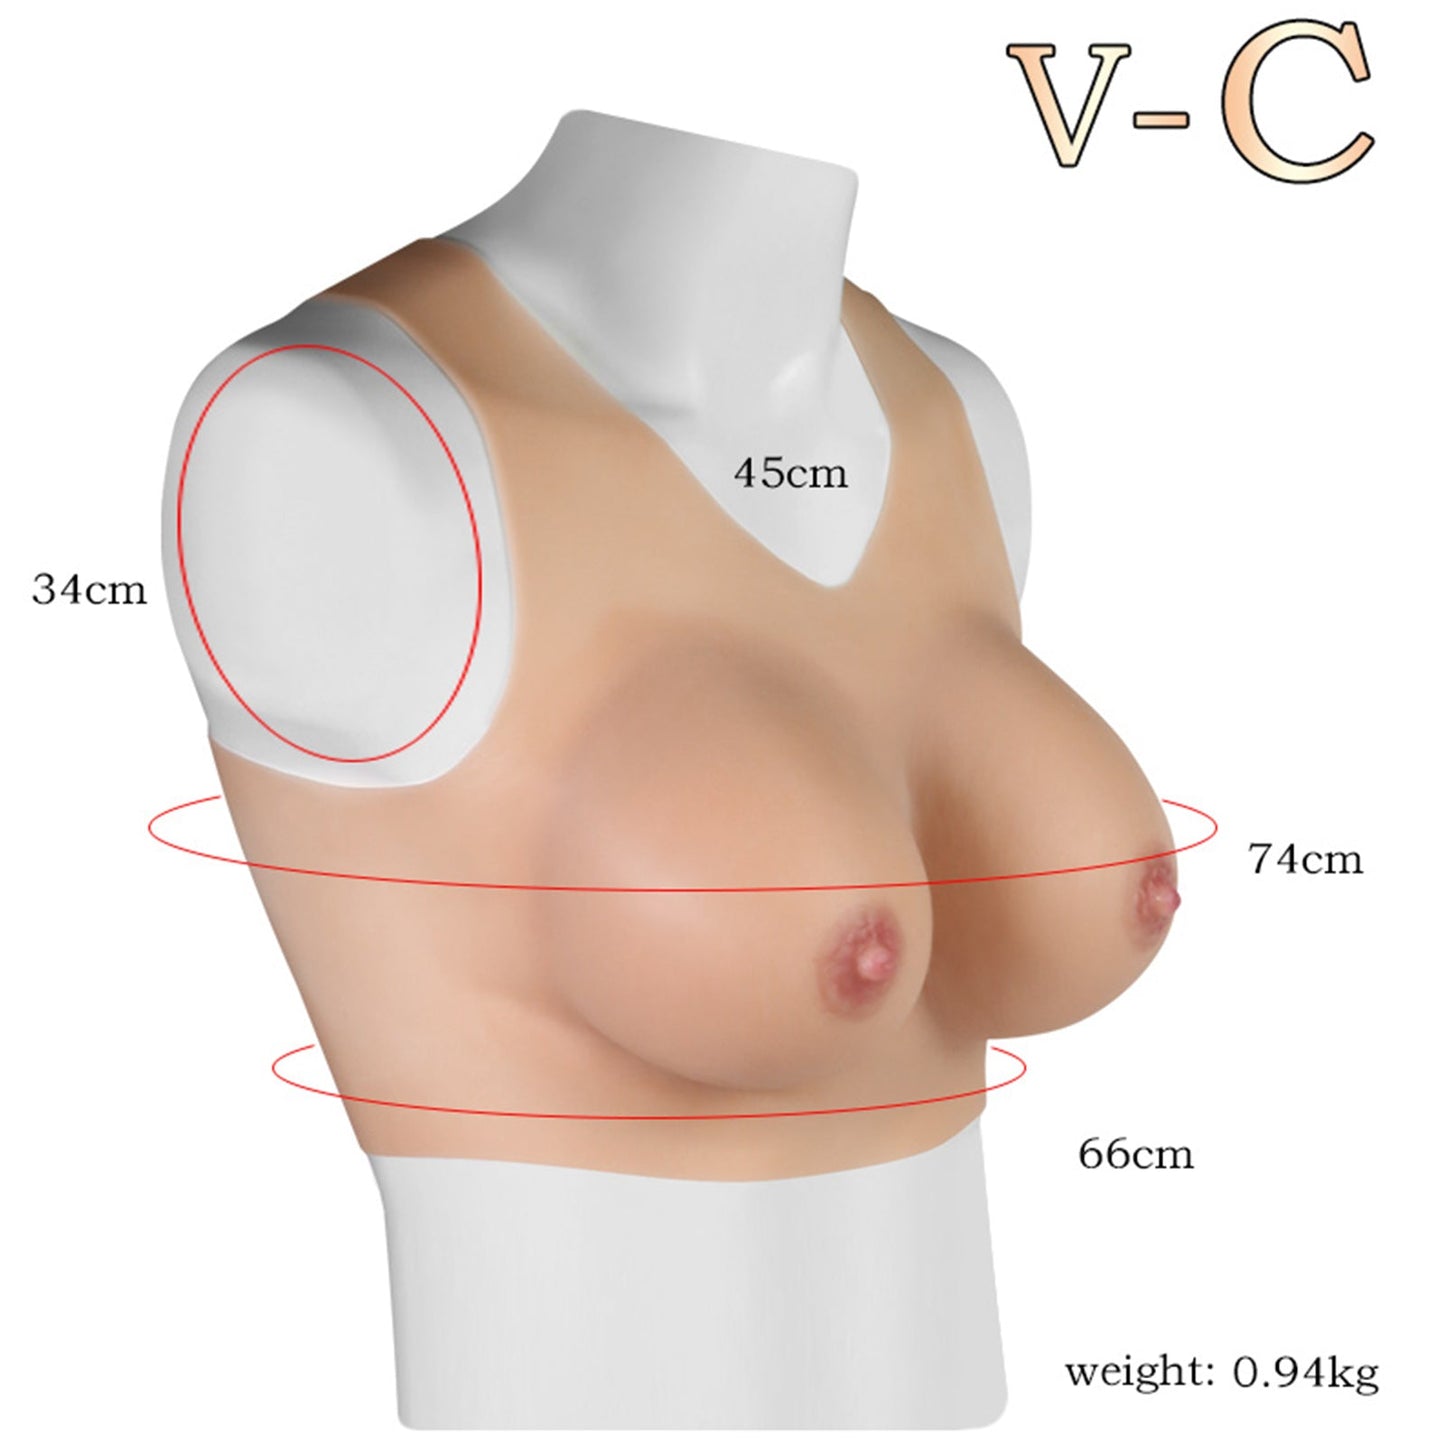 V Neck BF Cup Silicone Breast Forms Faux Seins pour Crossdresser Drag Queen